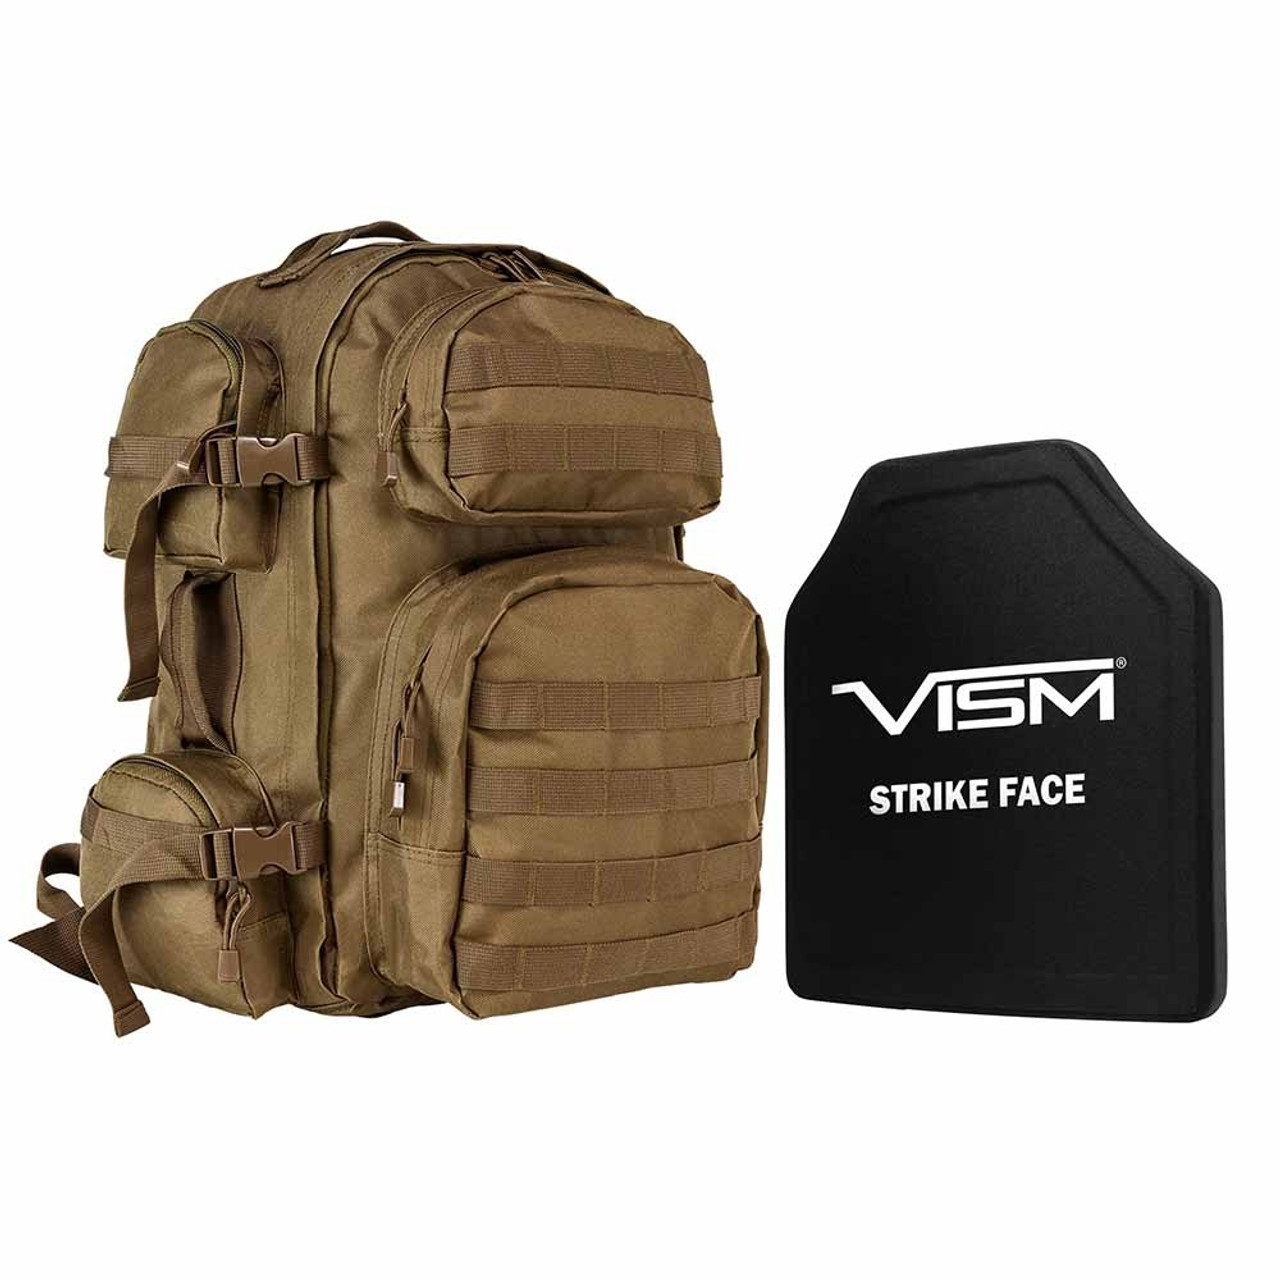 NcSTAR BPCBT2911-A Tactical Backpack With 10"X12" Level Iii+ Shooters Cut Pe Hard Ballistic Plate